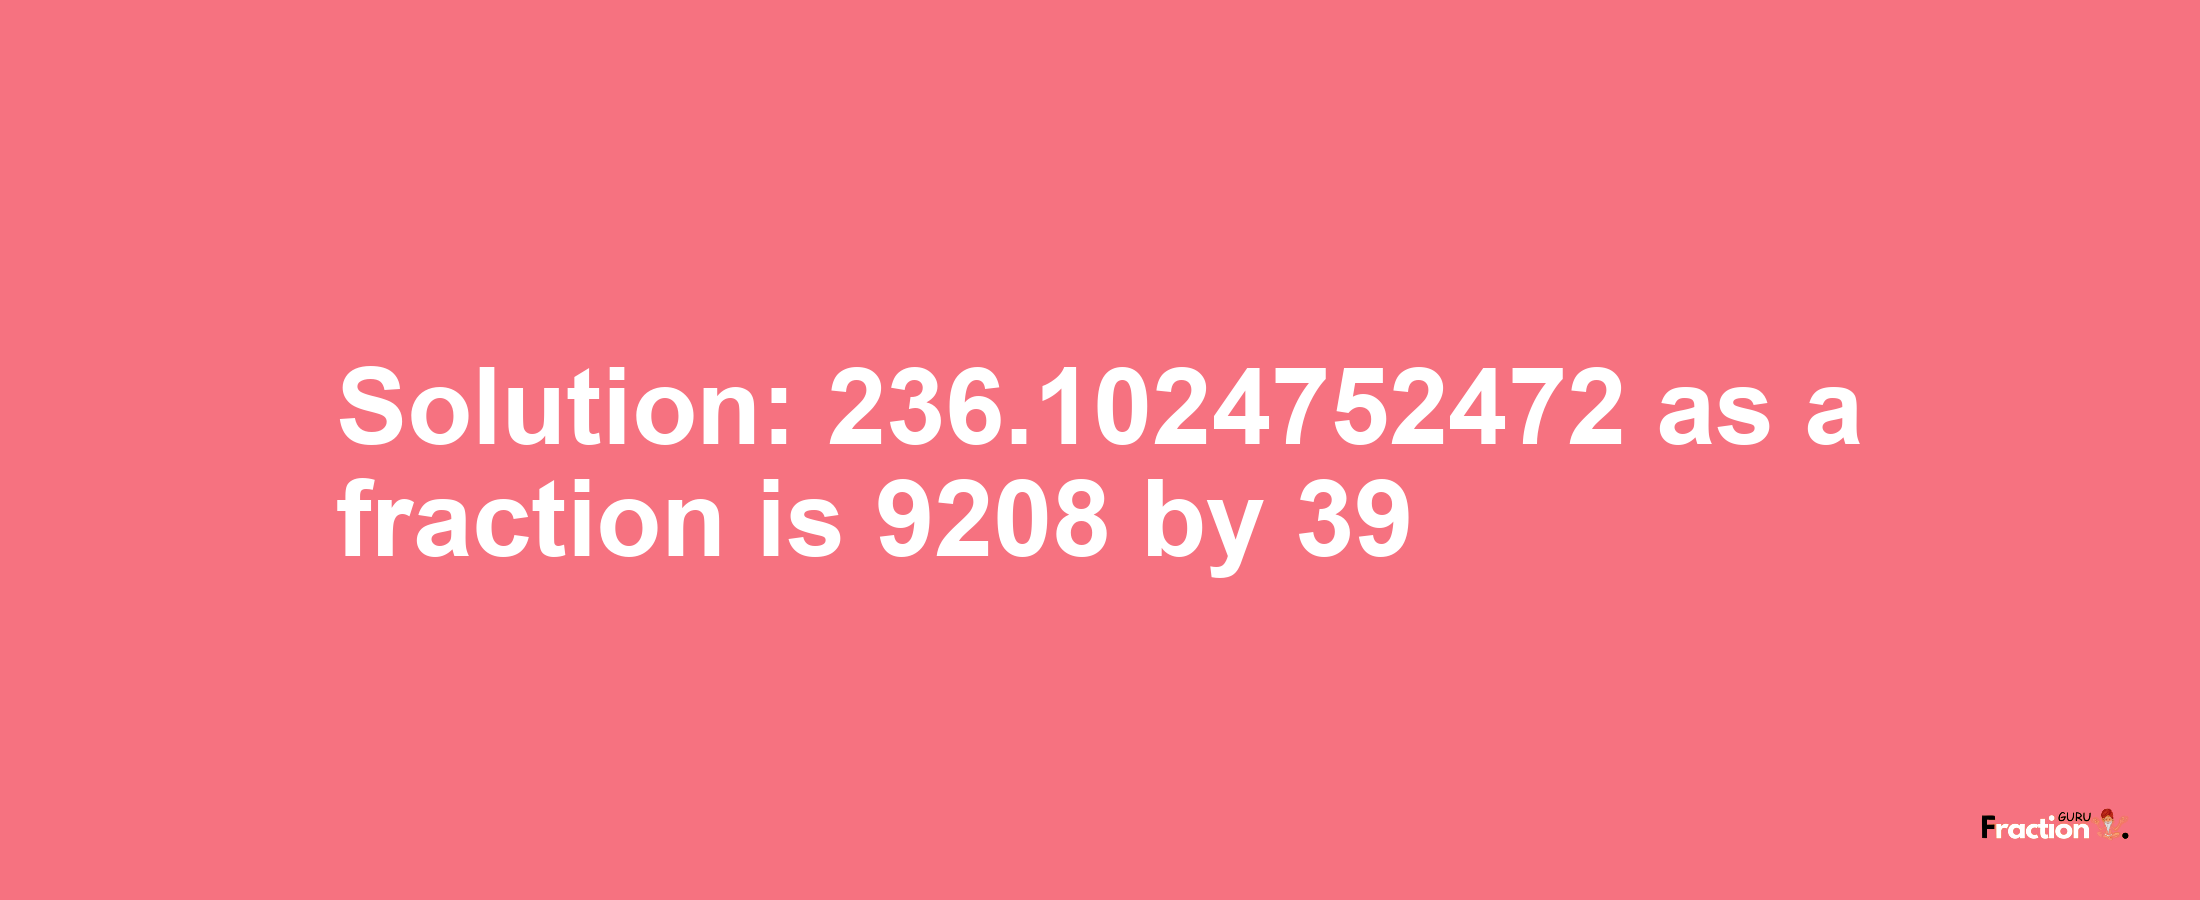 Solution:236.1024752472 as a fraction is 9208/39